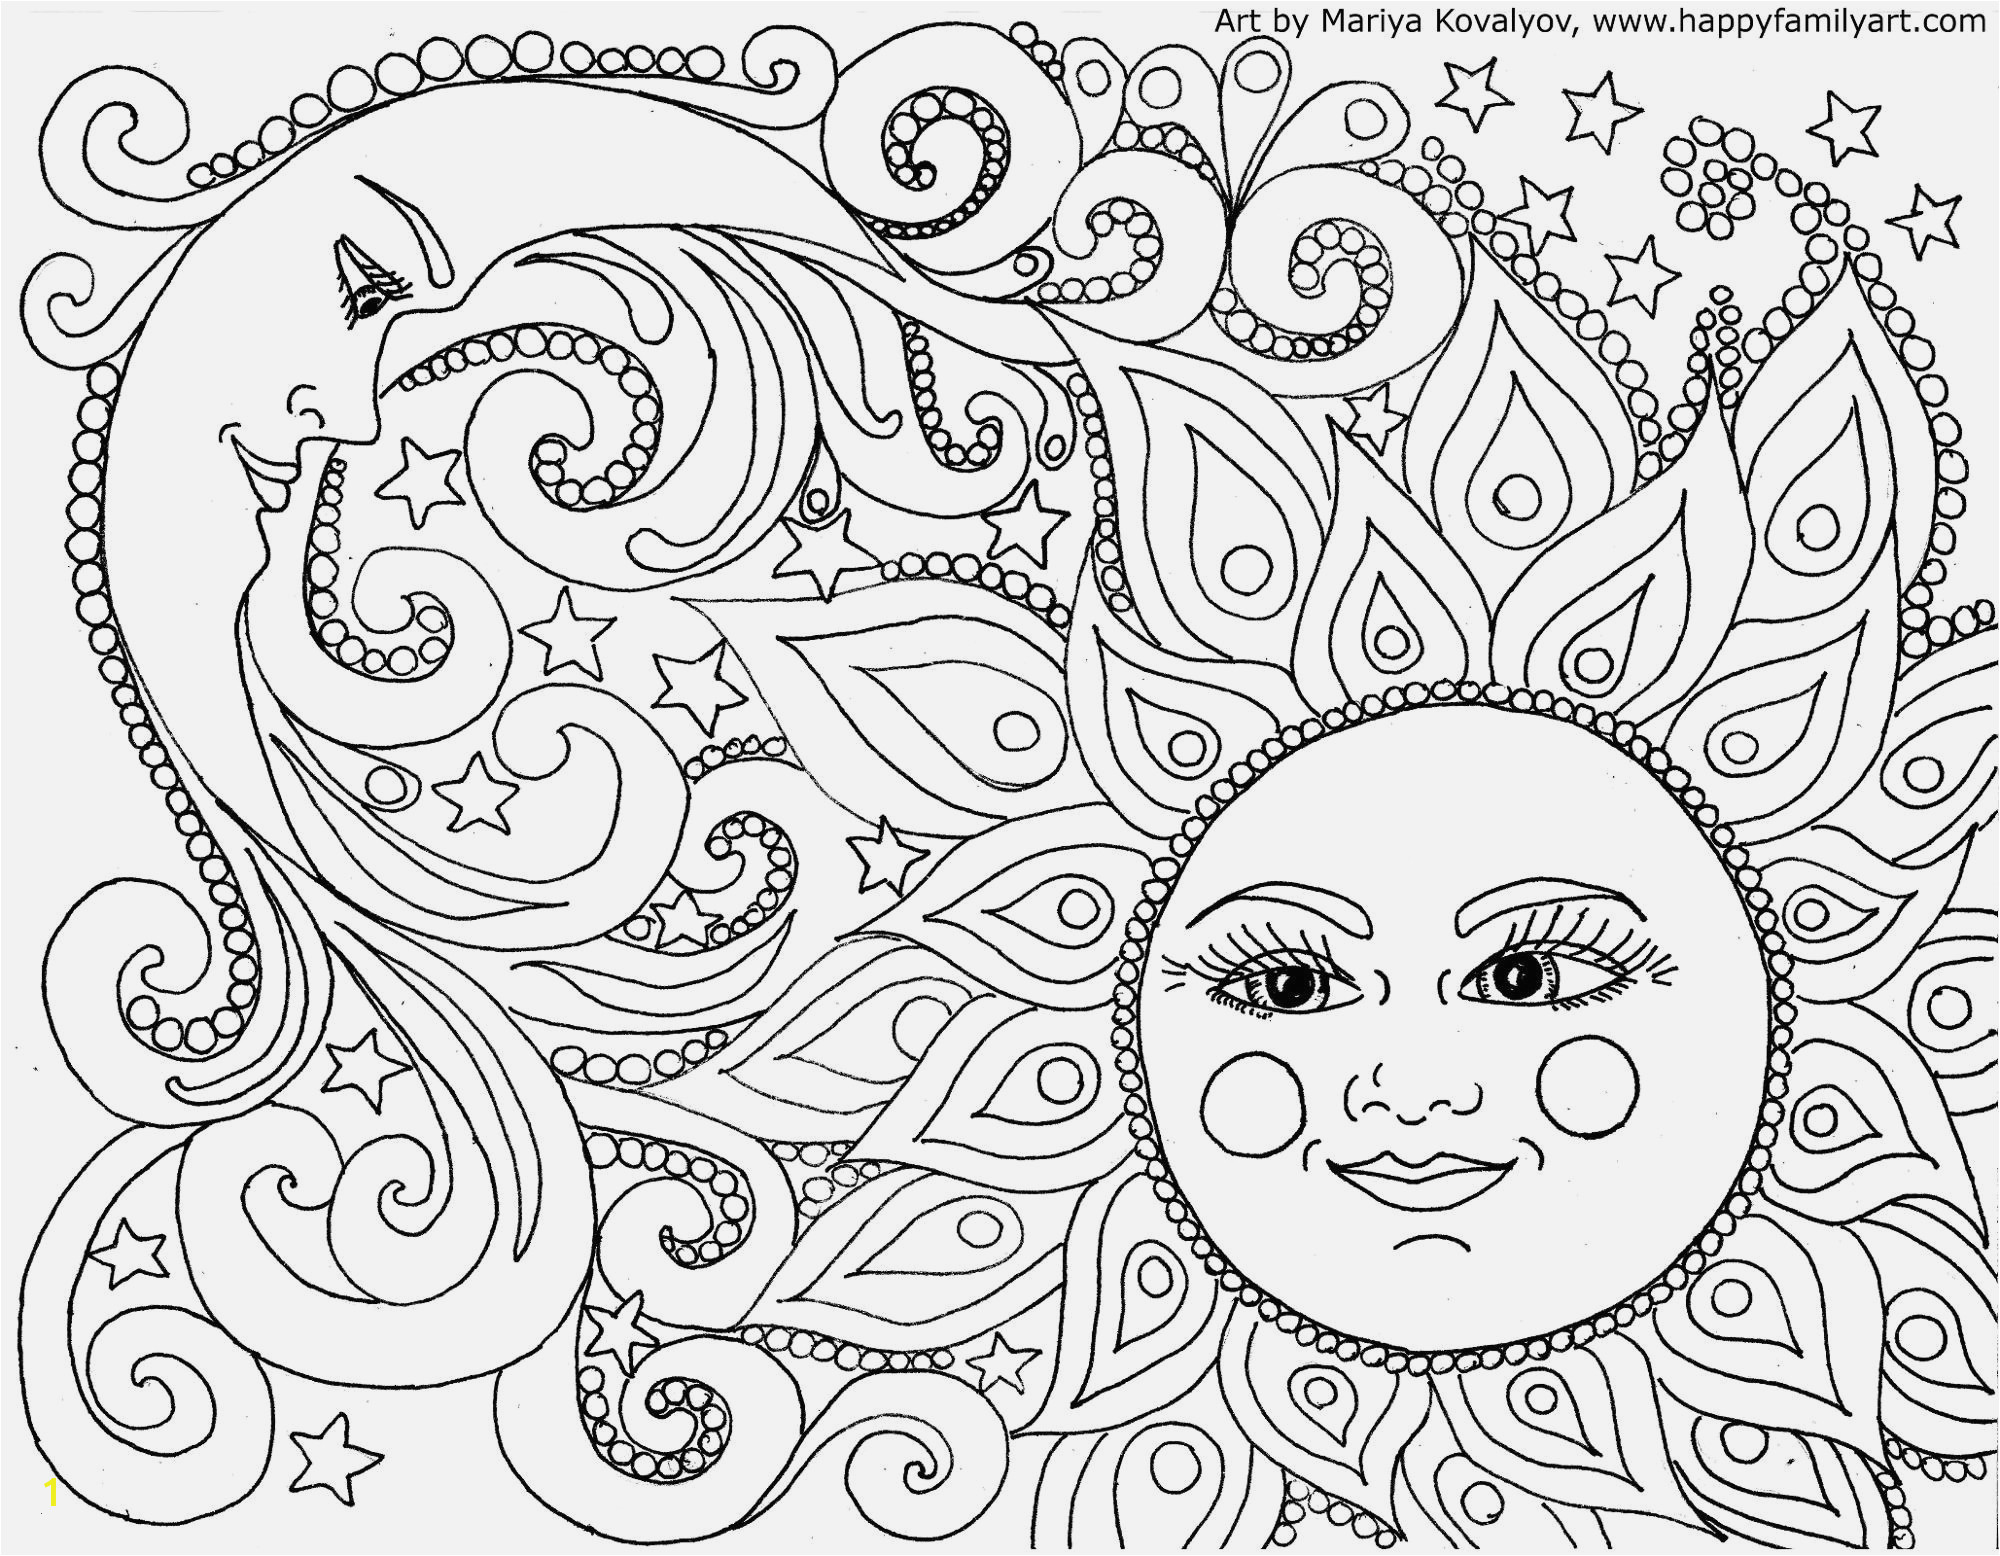 Printable Adult Valentine Coloring Pages Funny Coloring Pages for Adults Printable Coloring Pages Adult